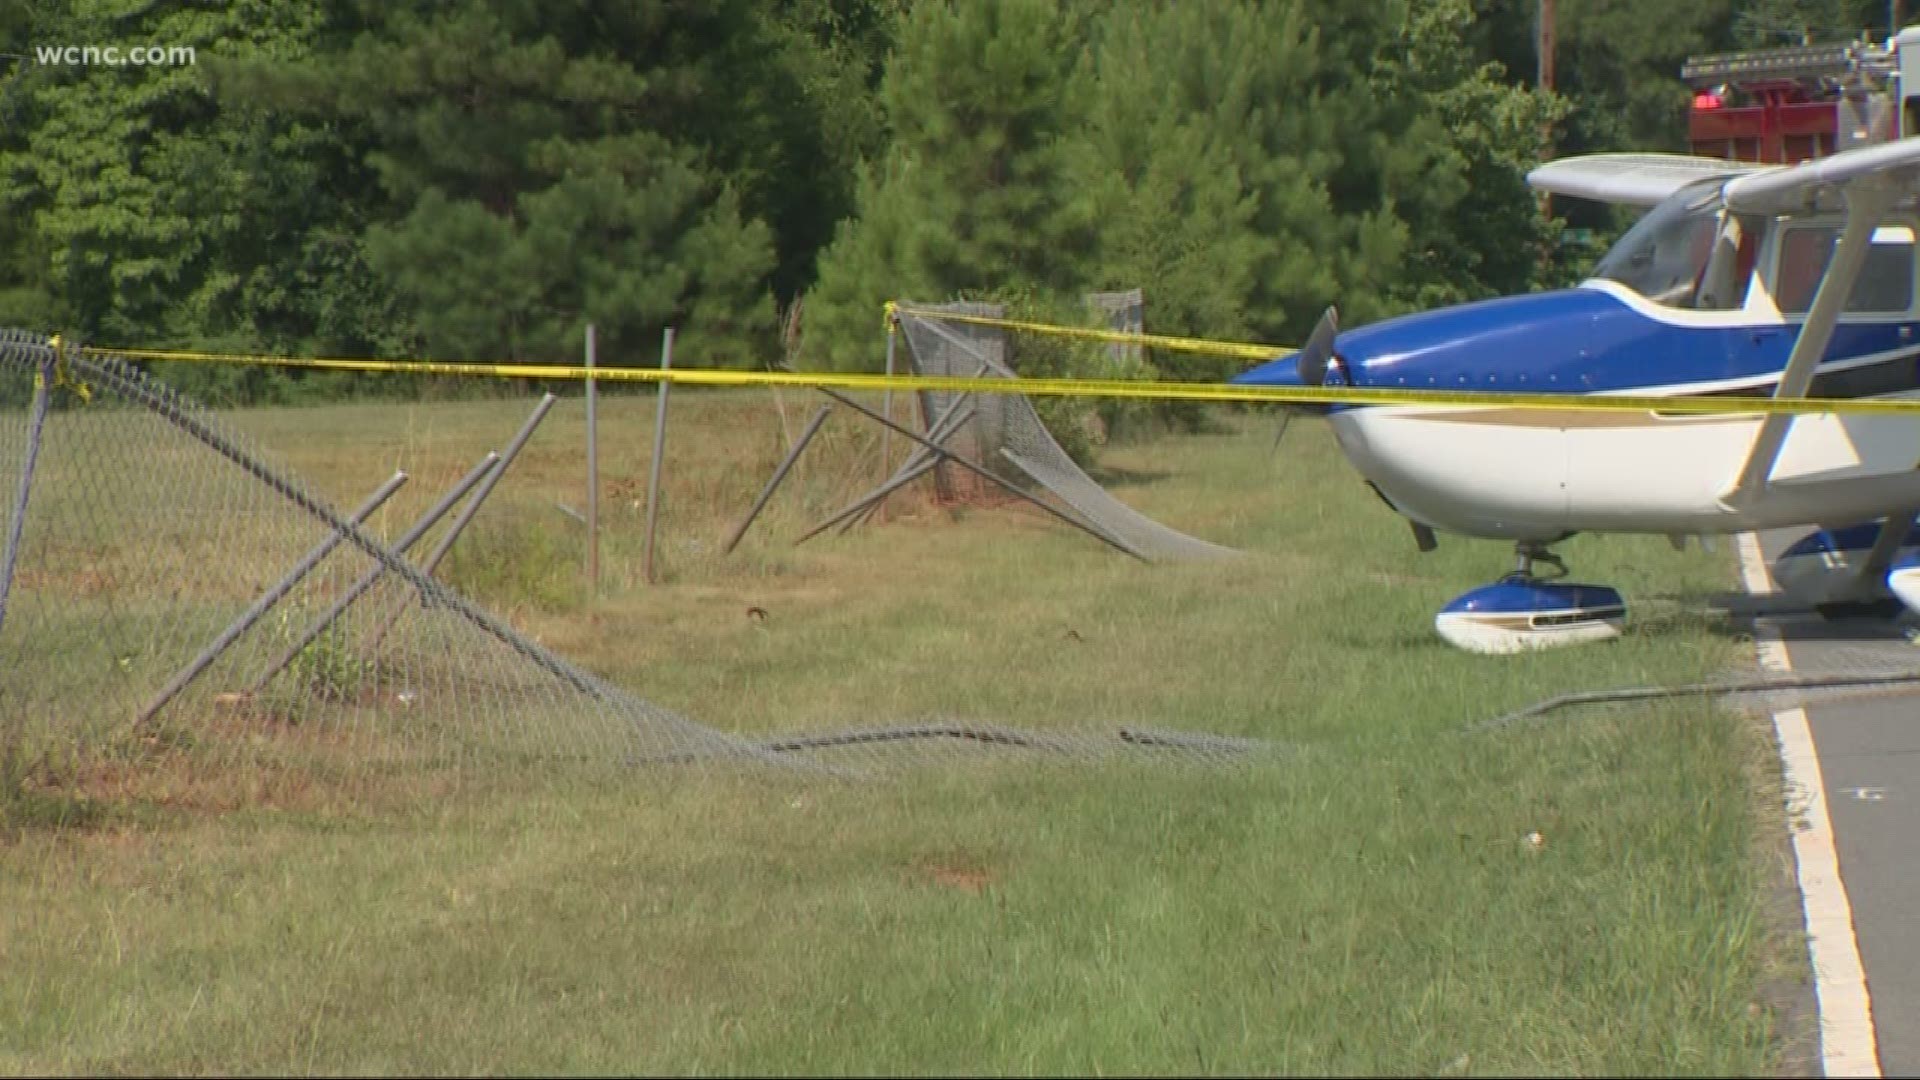 According to Charlotte Fire, the plane missed the runway while trying to land at the Wilgrove Airport.